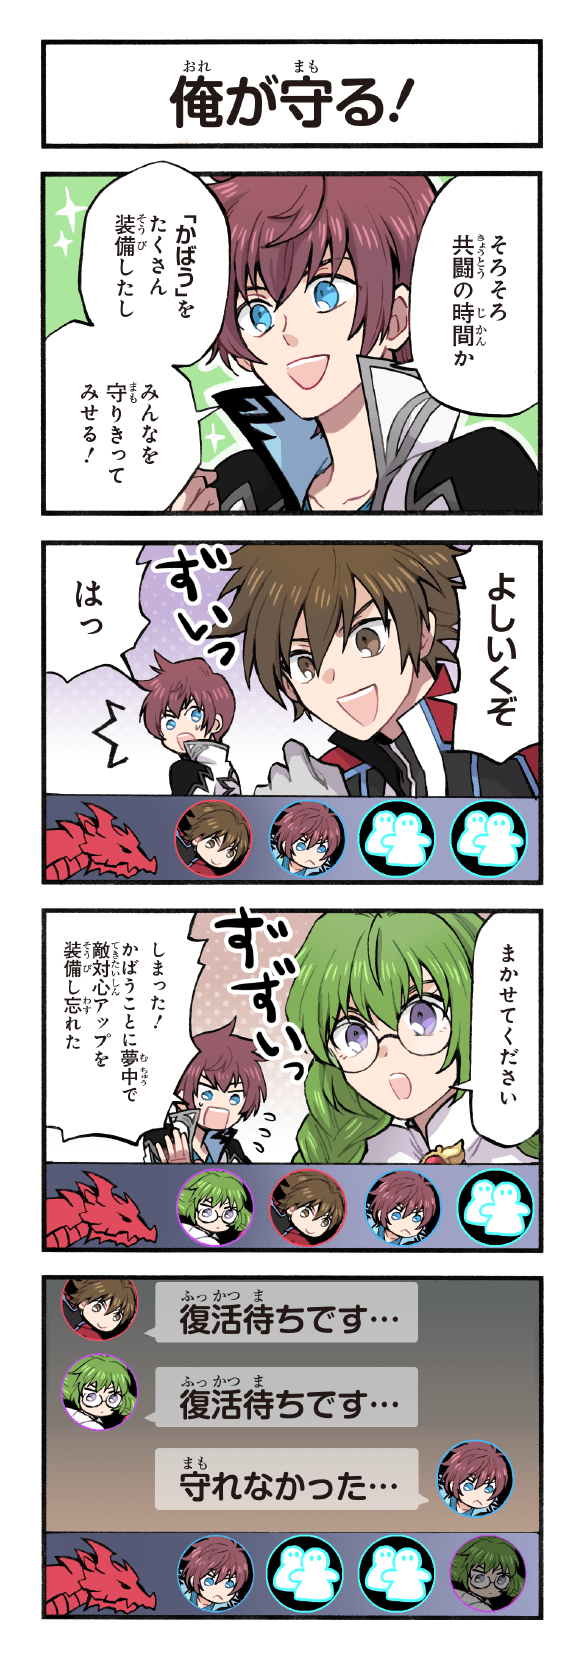 asbel lhant, philia felice, and kor meteor (tales of and 4 more) drawn by kirai_y